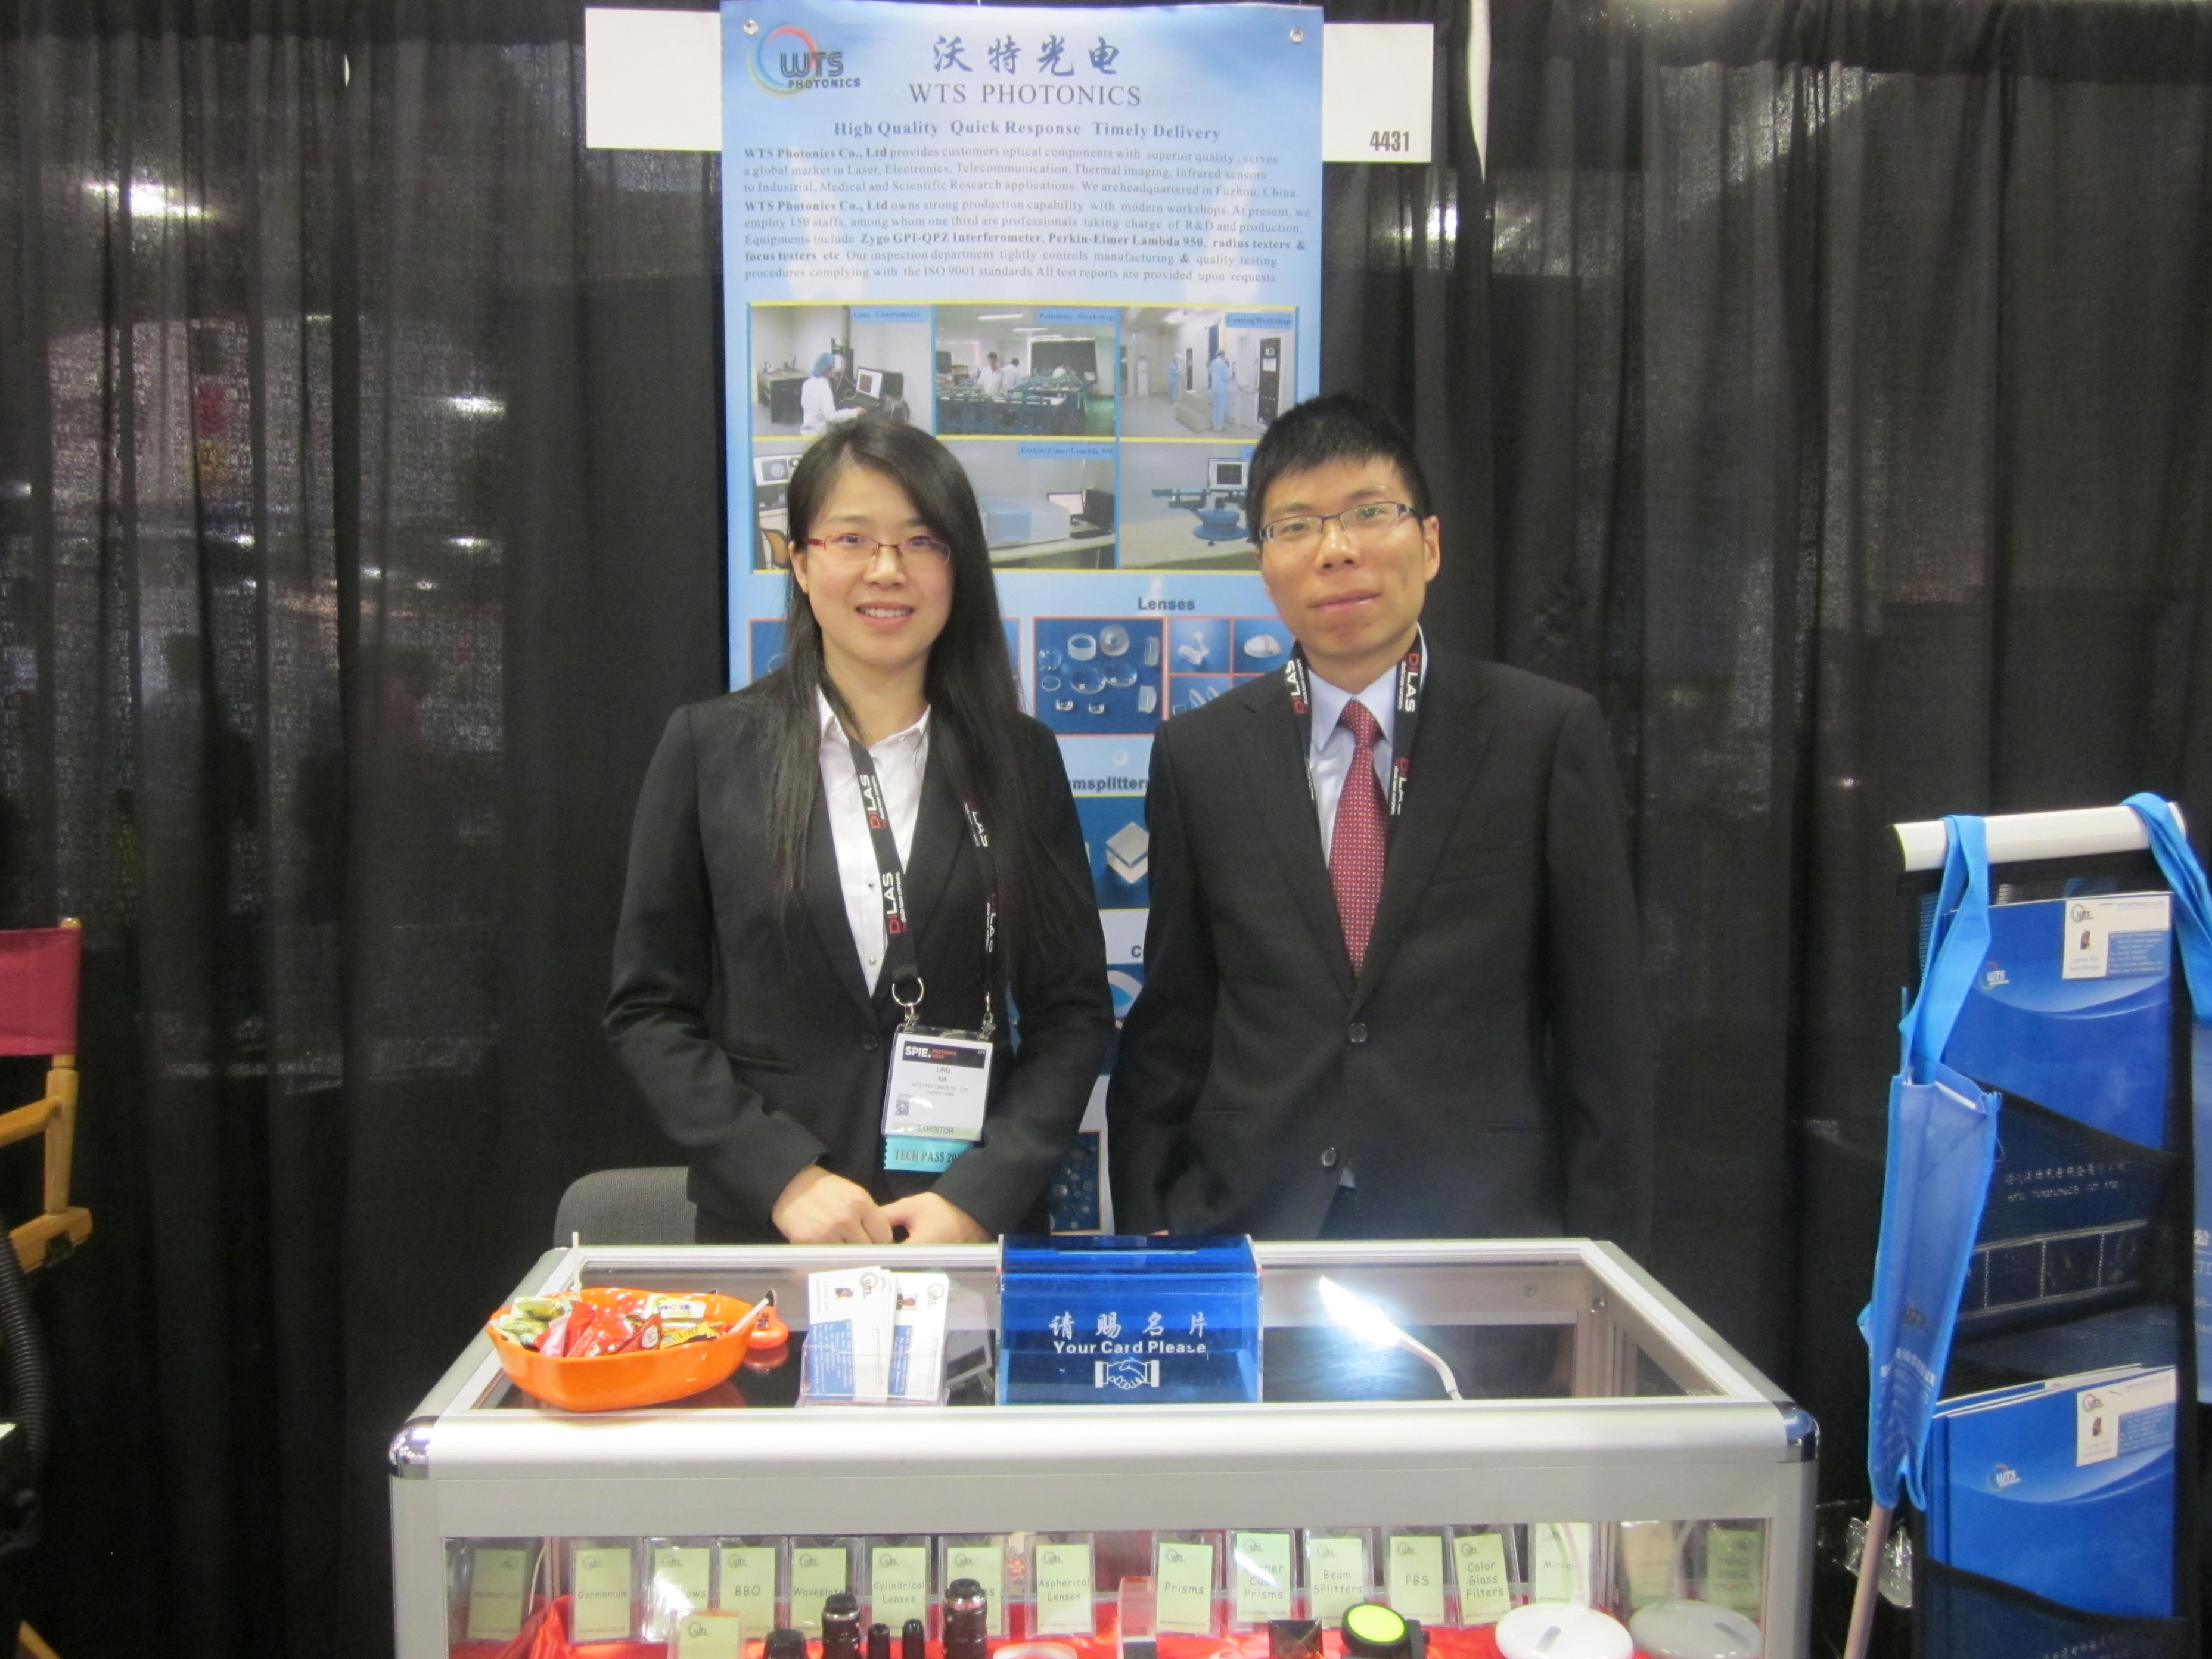 WTS Photonics Has Successfully Participated In PHOTONIS WEST 2016